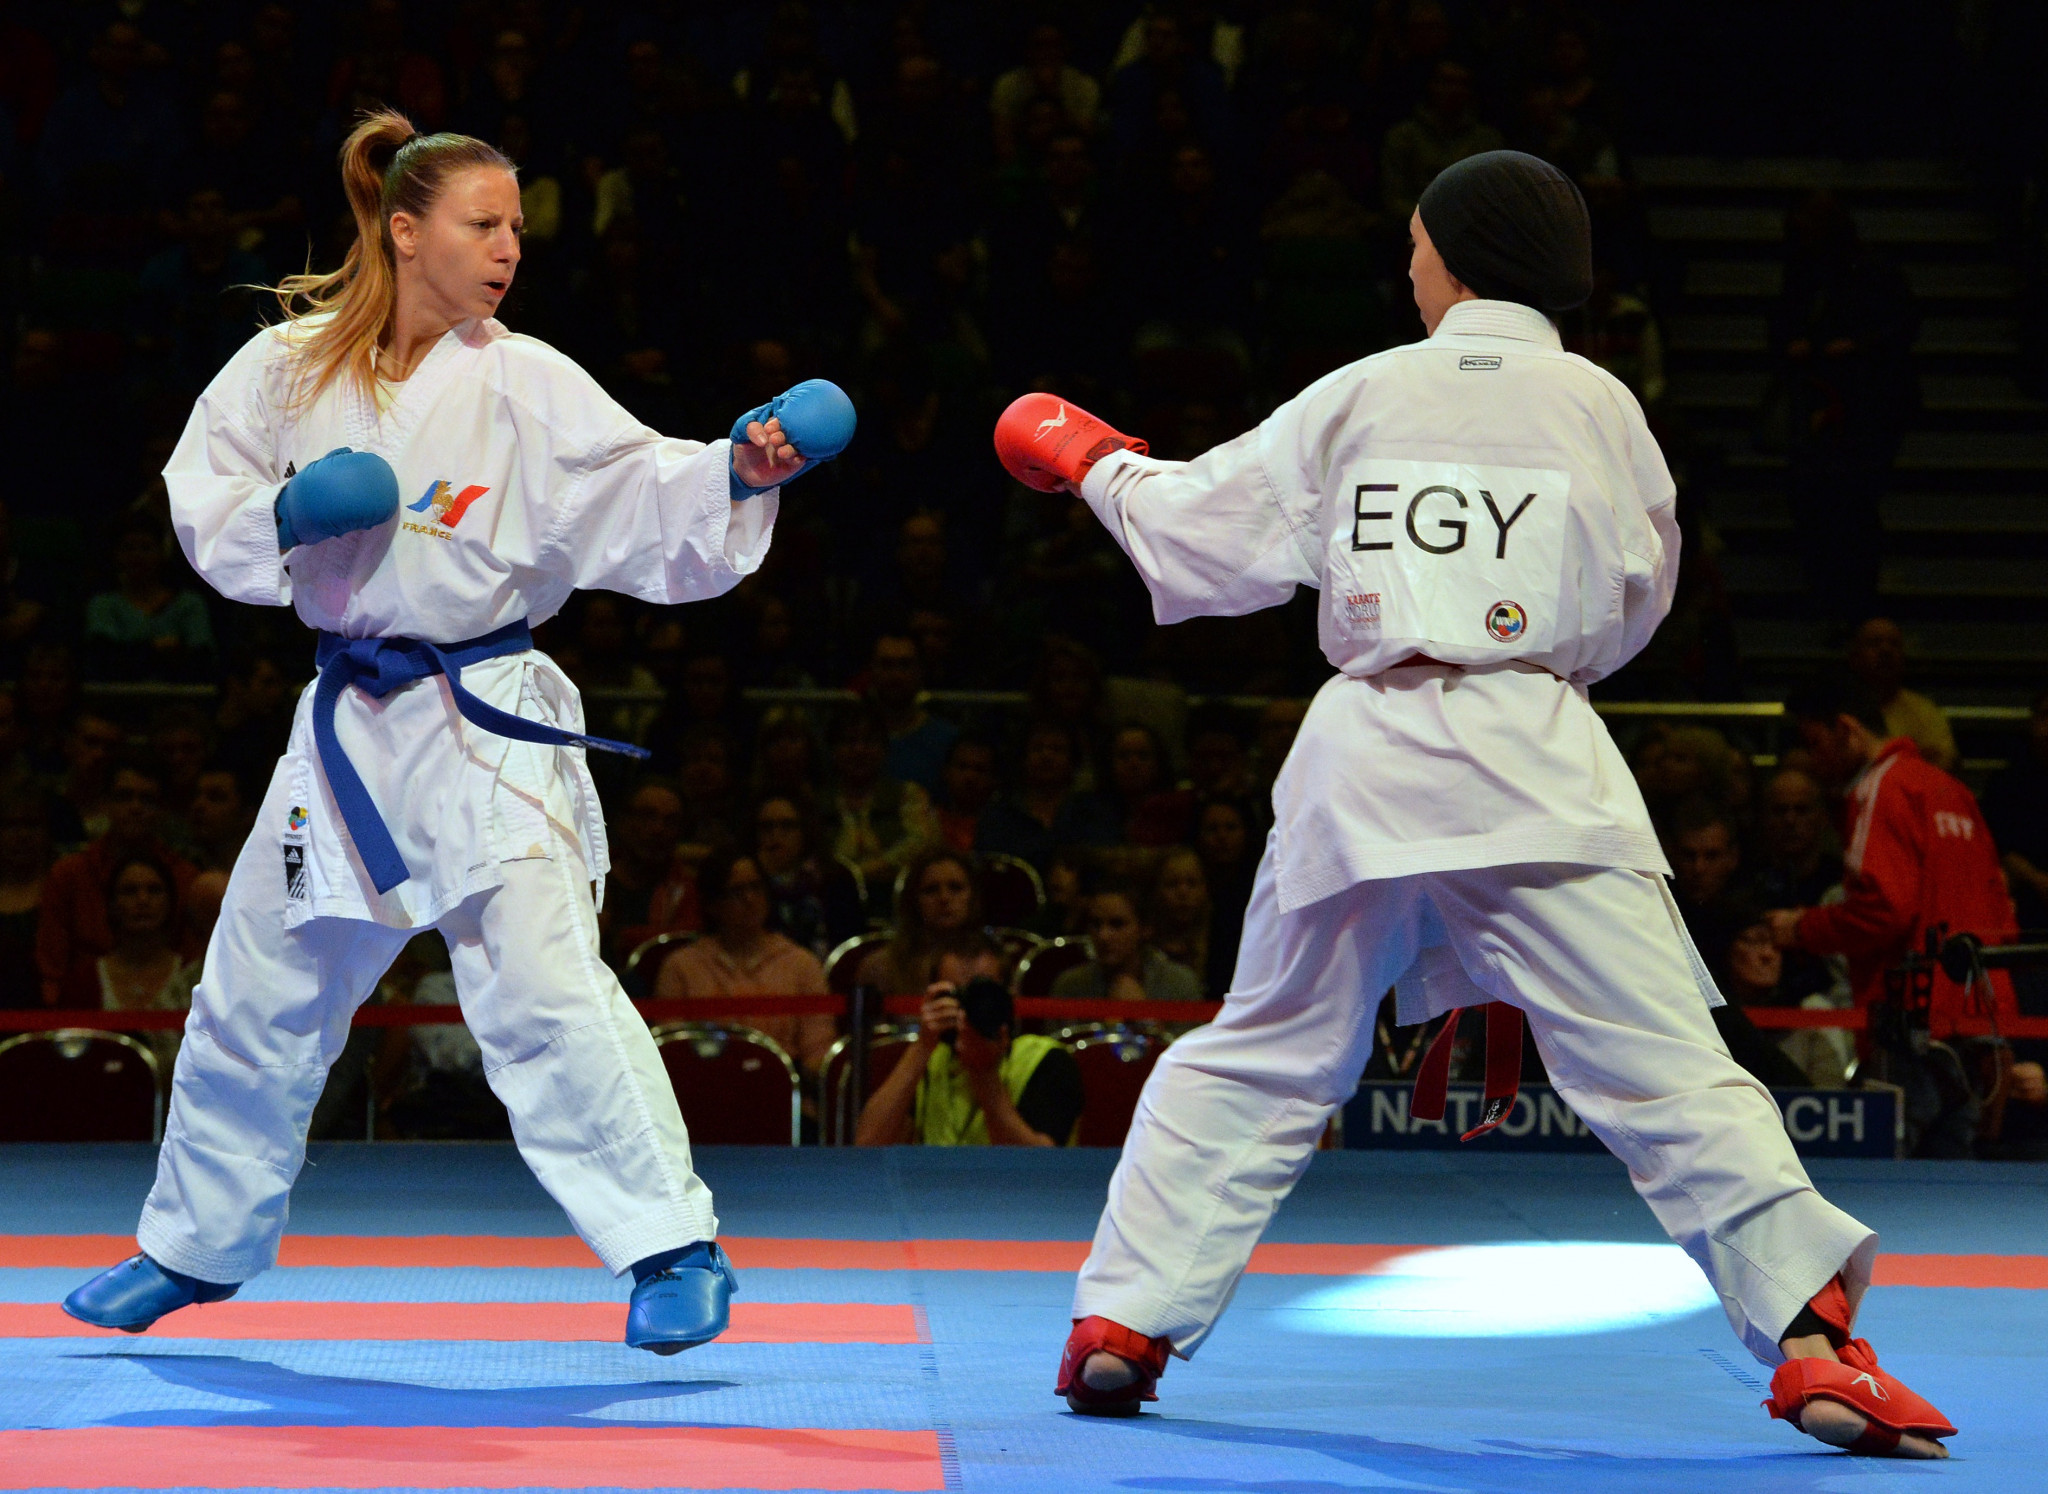 Alexandra Recchia, left, will represent hosts France at the first Karate 1-Premier League event of the 2018 season ©Getty Images